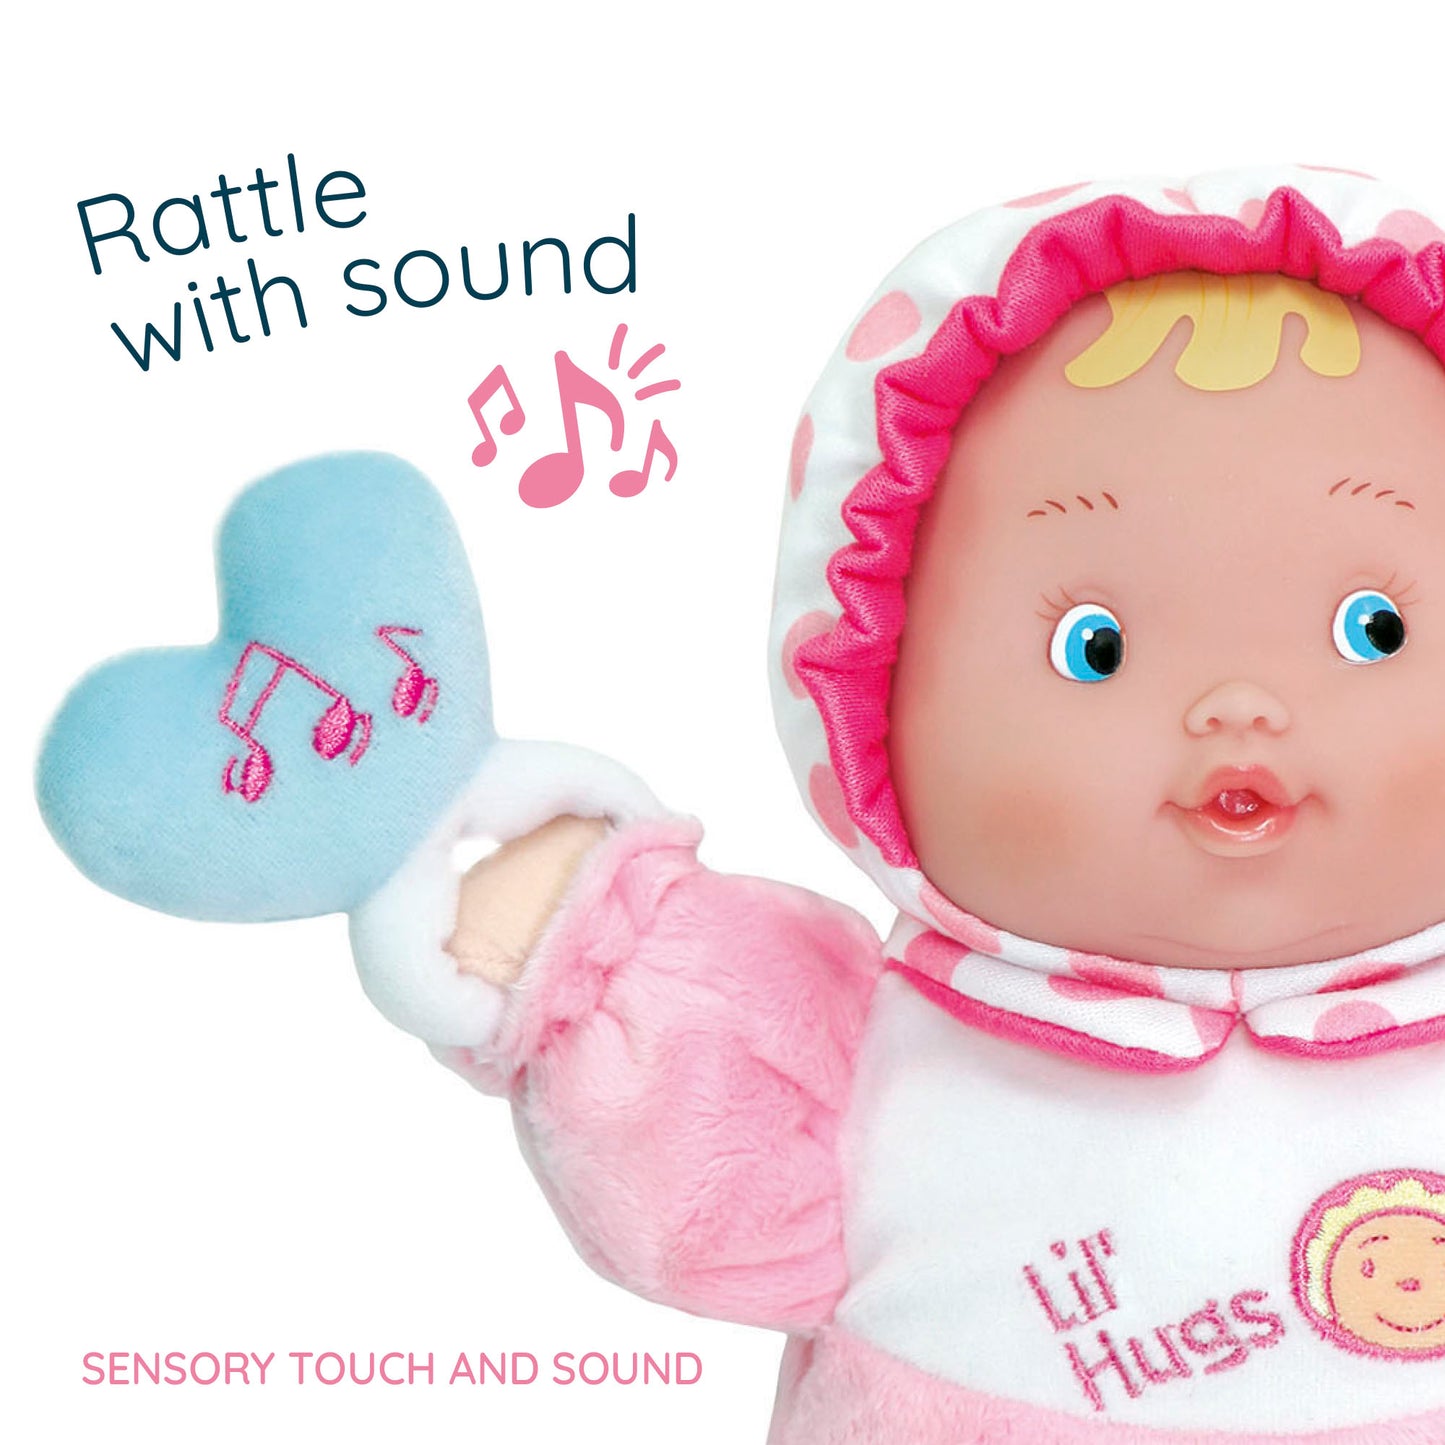 Lil' Hugs 12" Baby's First Doll